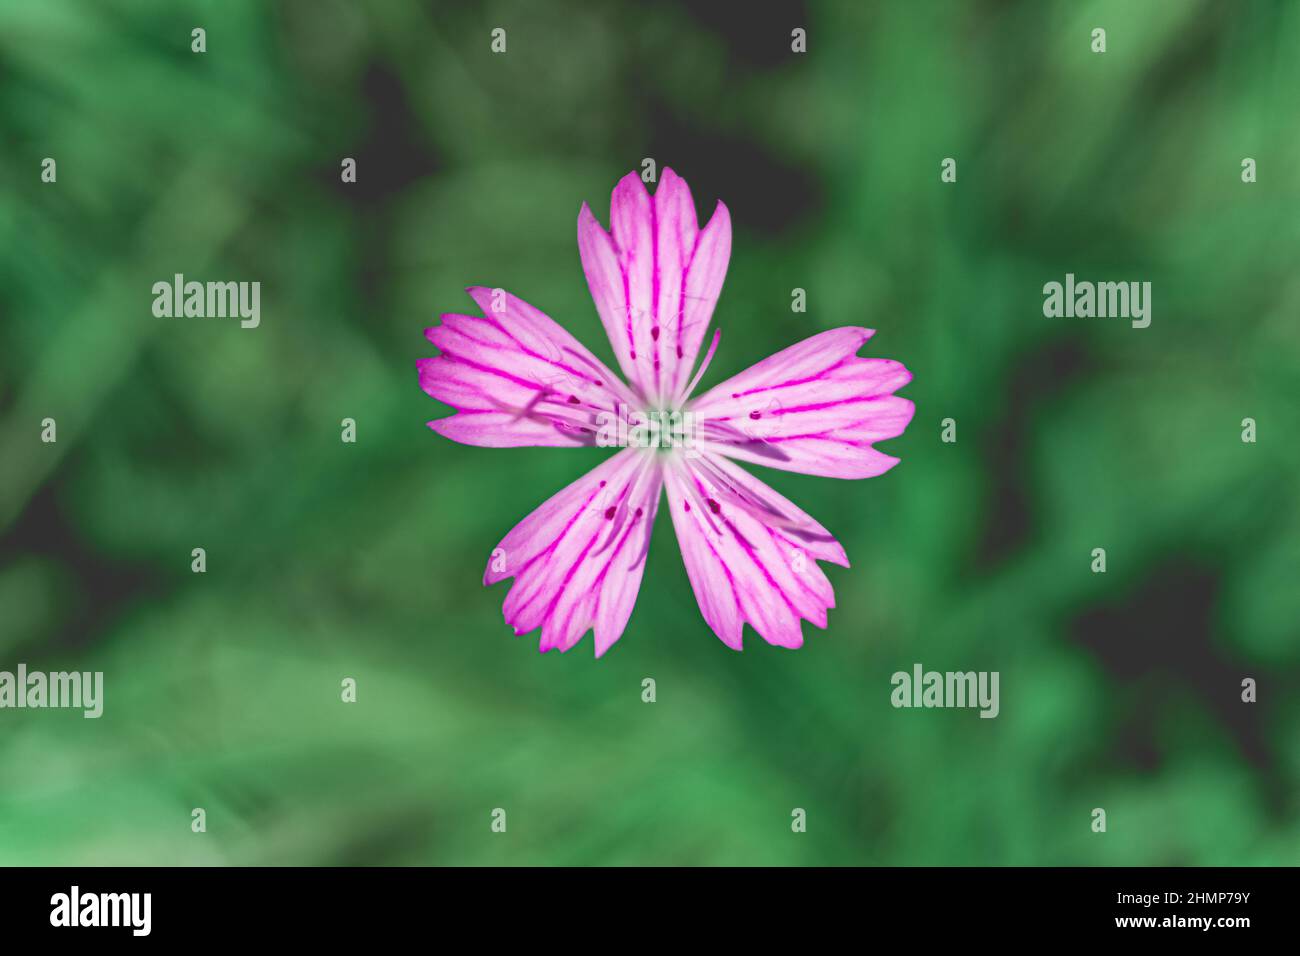 Single flower of Carthusian Pink (Dianthus carthusianorum). Green natural background. Stock Photo